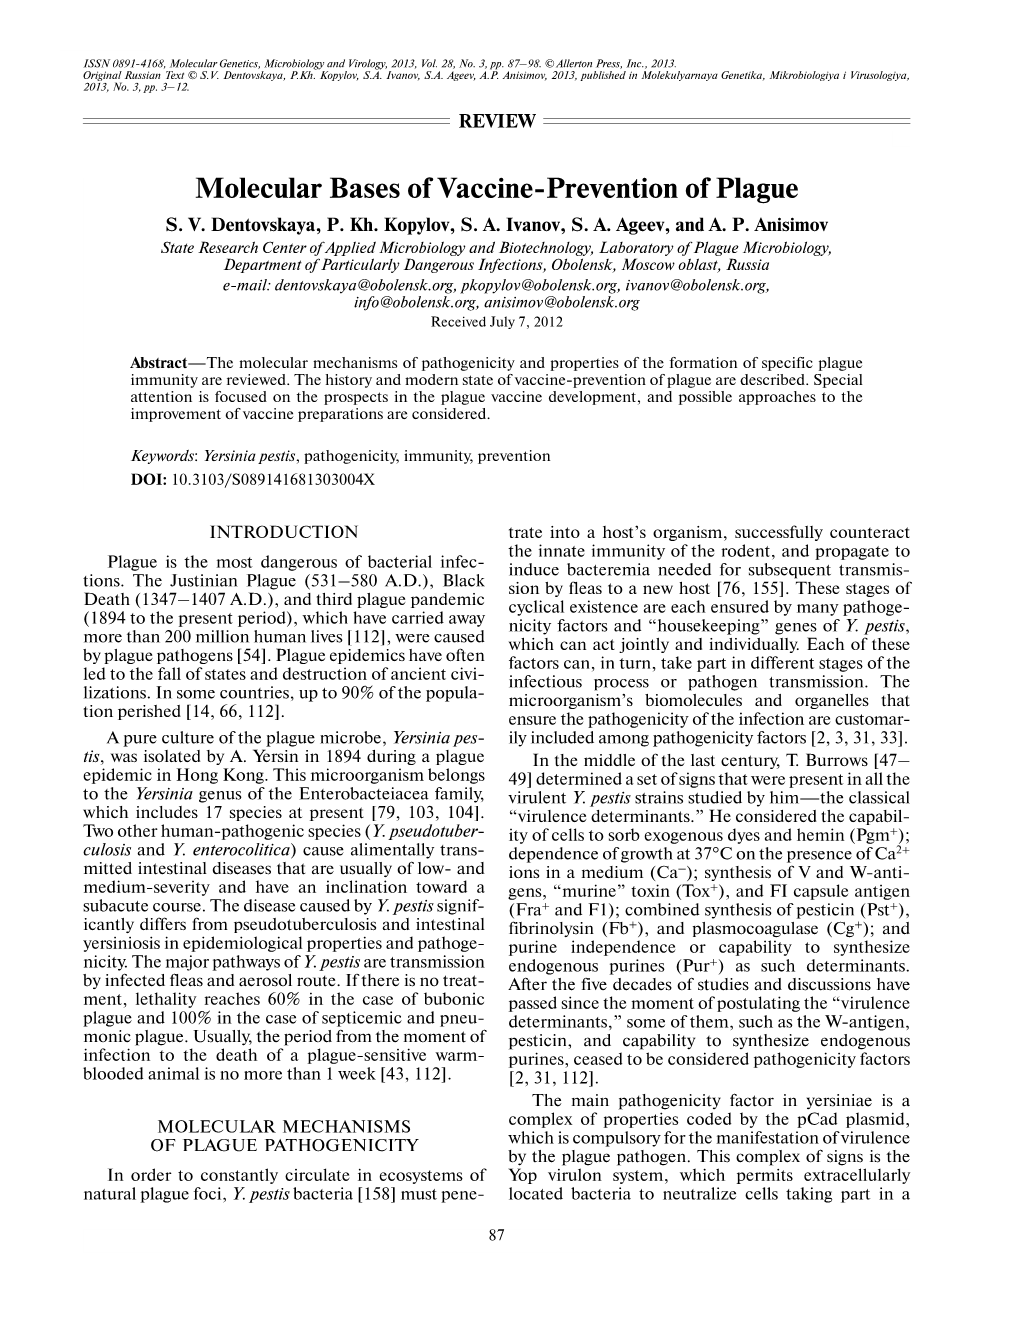 Molecular Bases of Vaccine Prevention of Plague